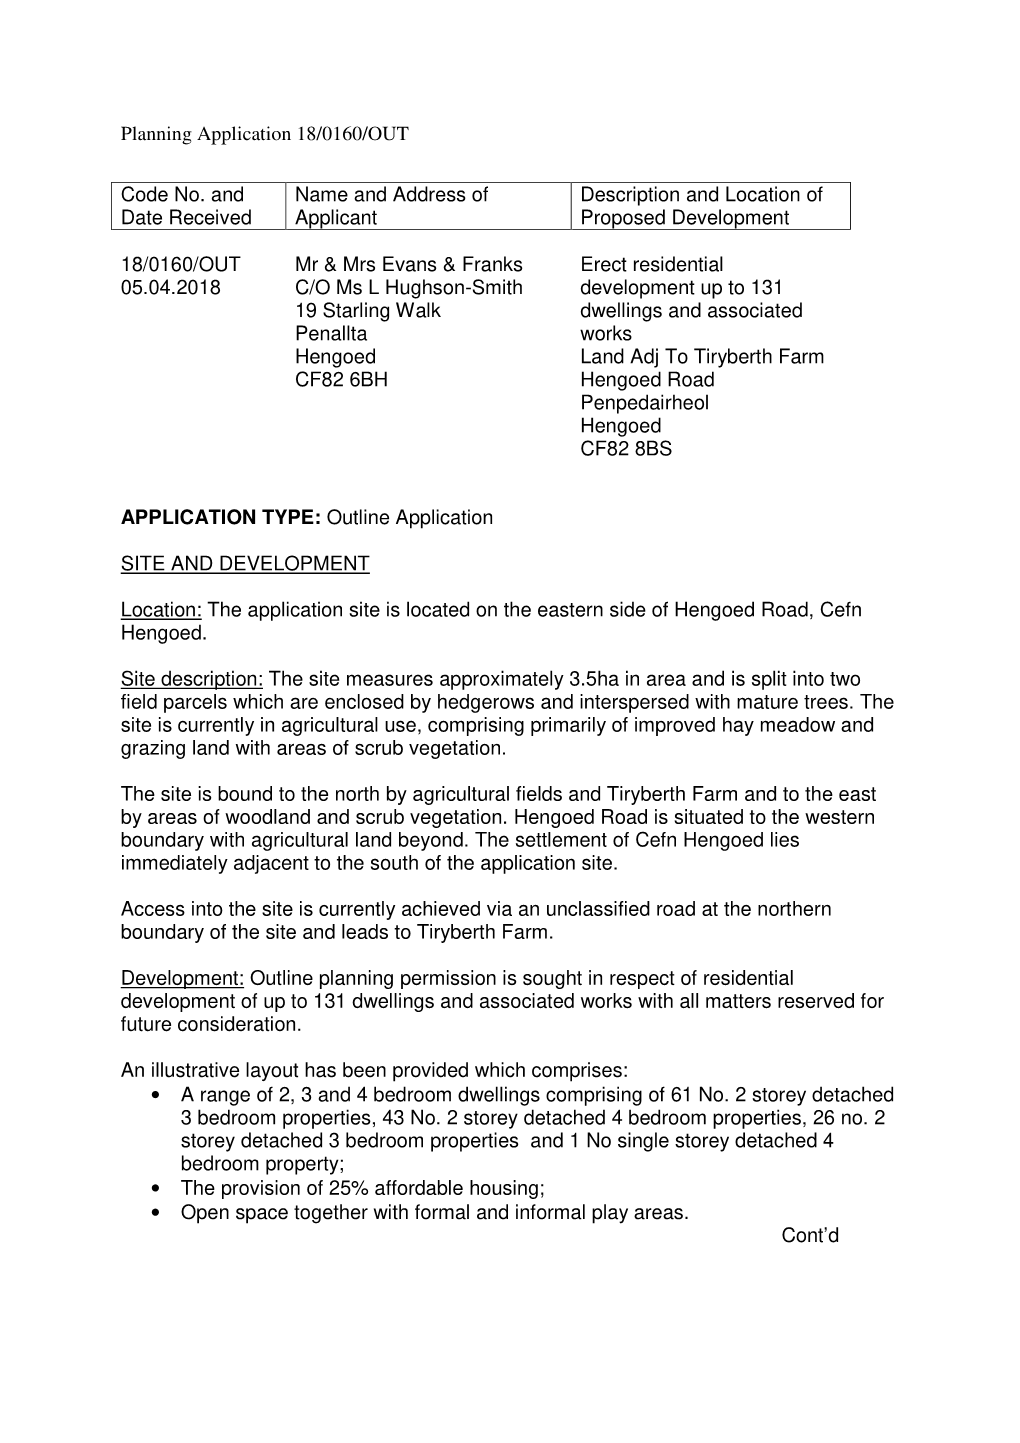 Planning Application 18/0160/OUT